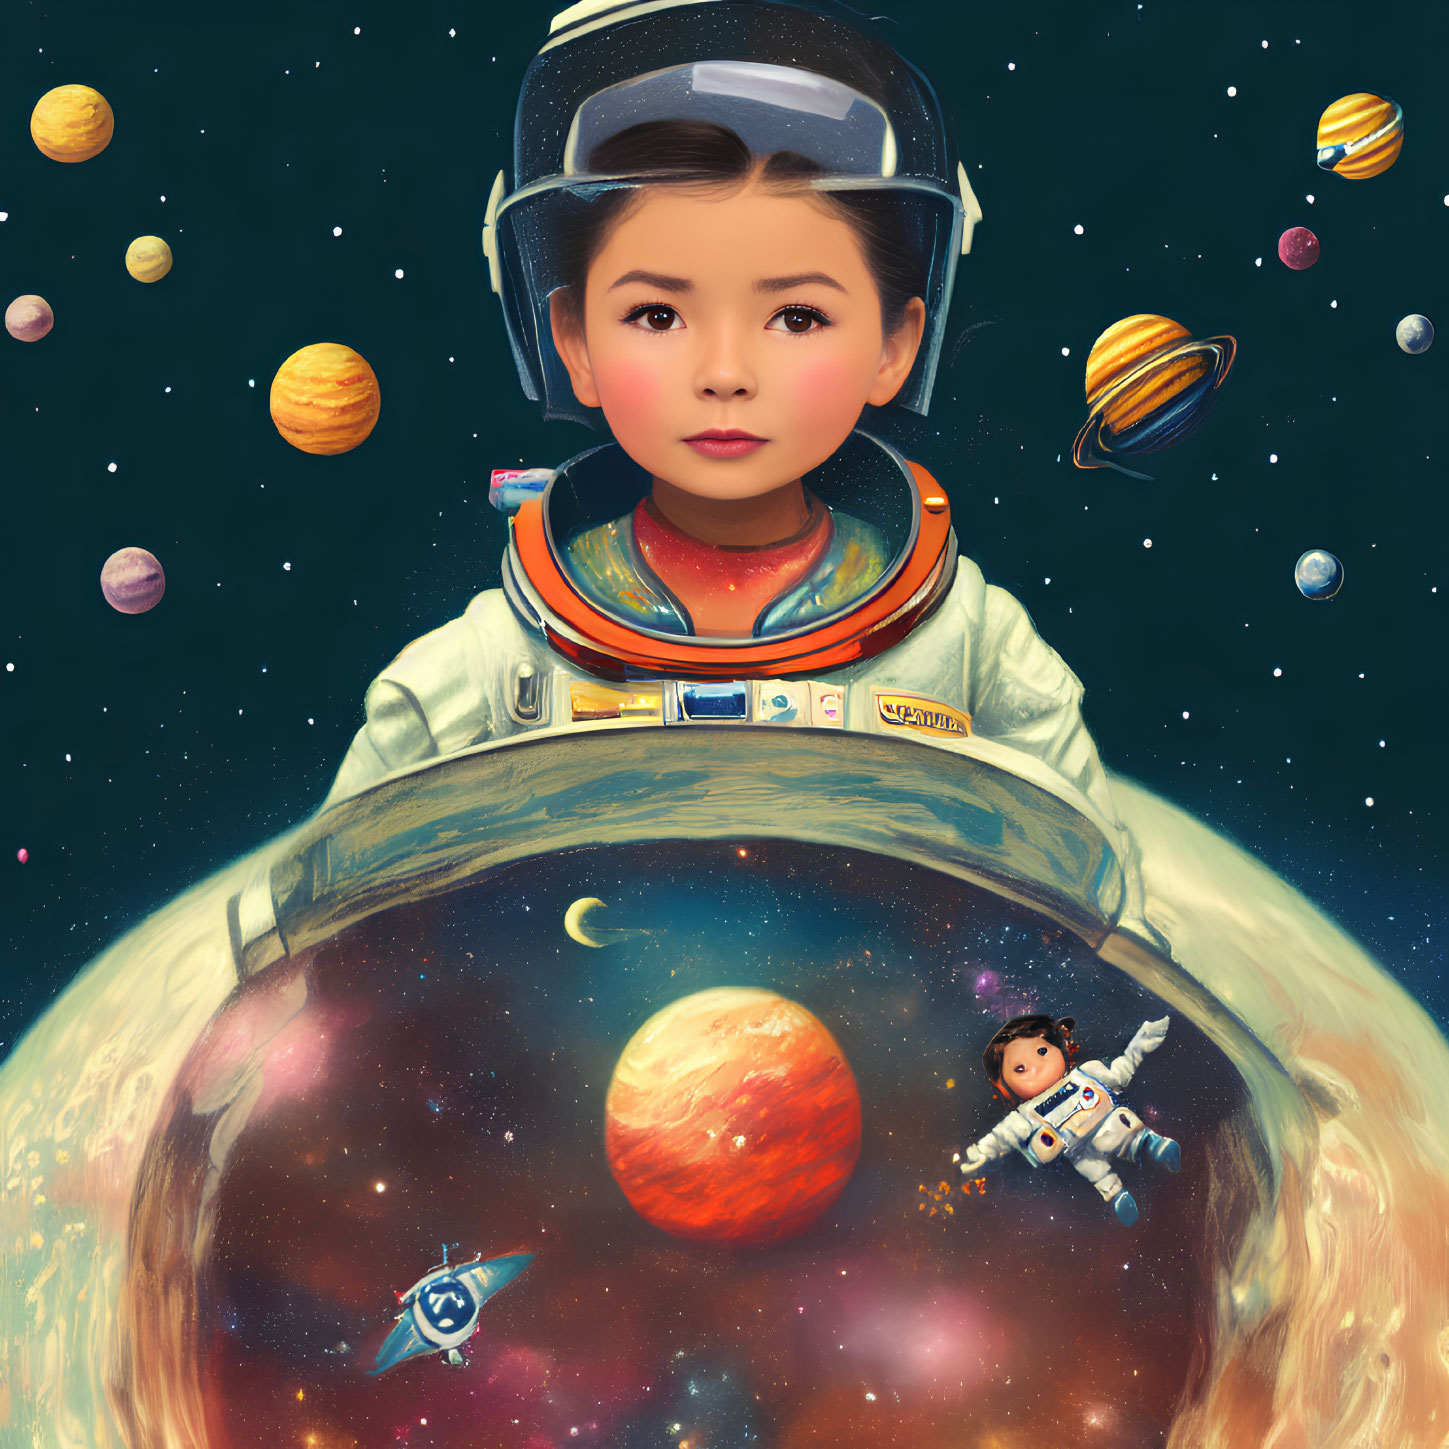 Child in astronaut suit with colorful planets reflection on visor in space scene